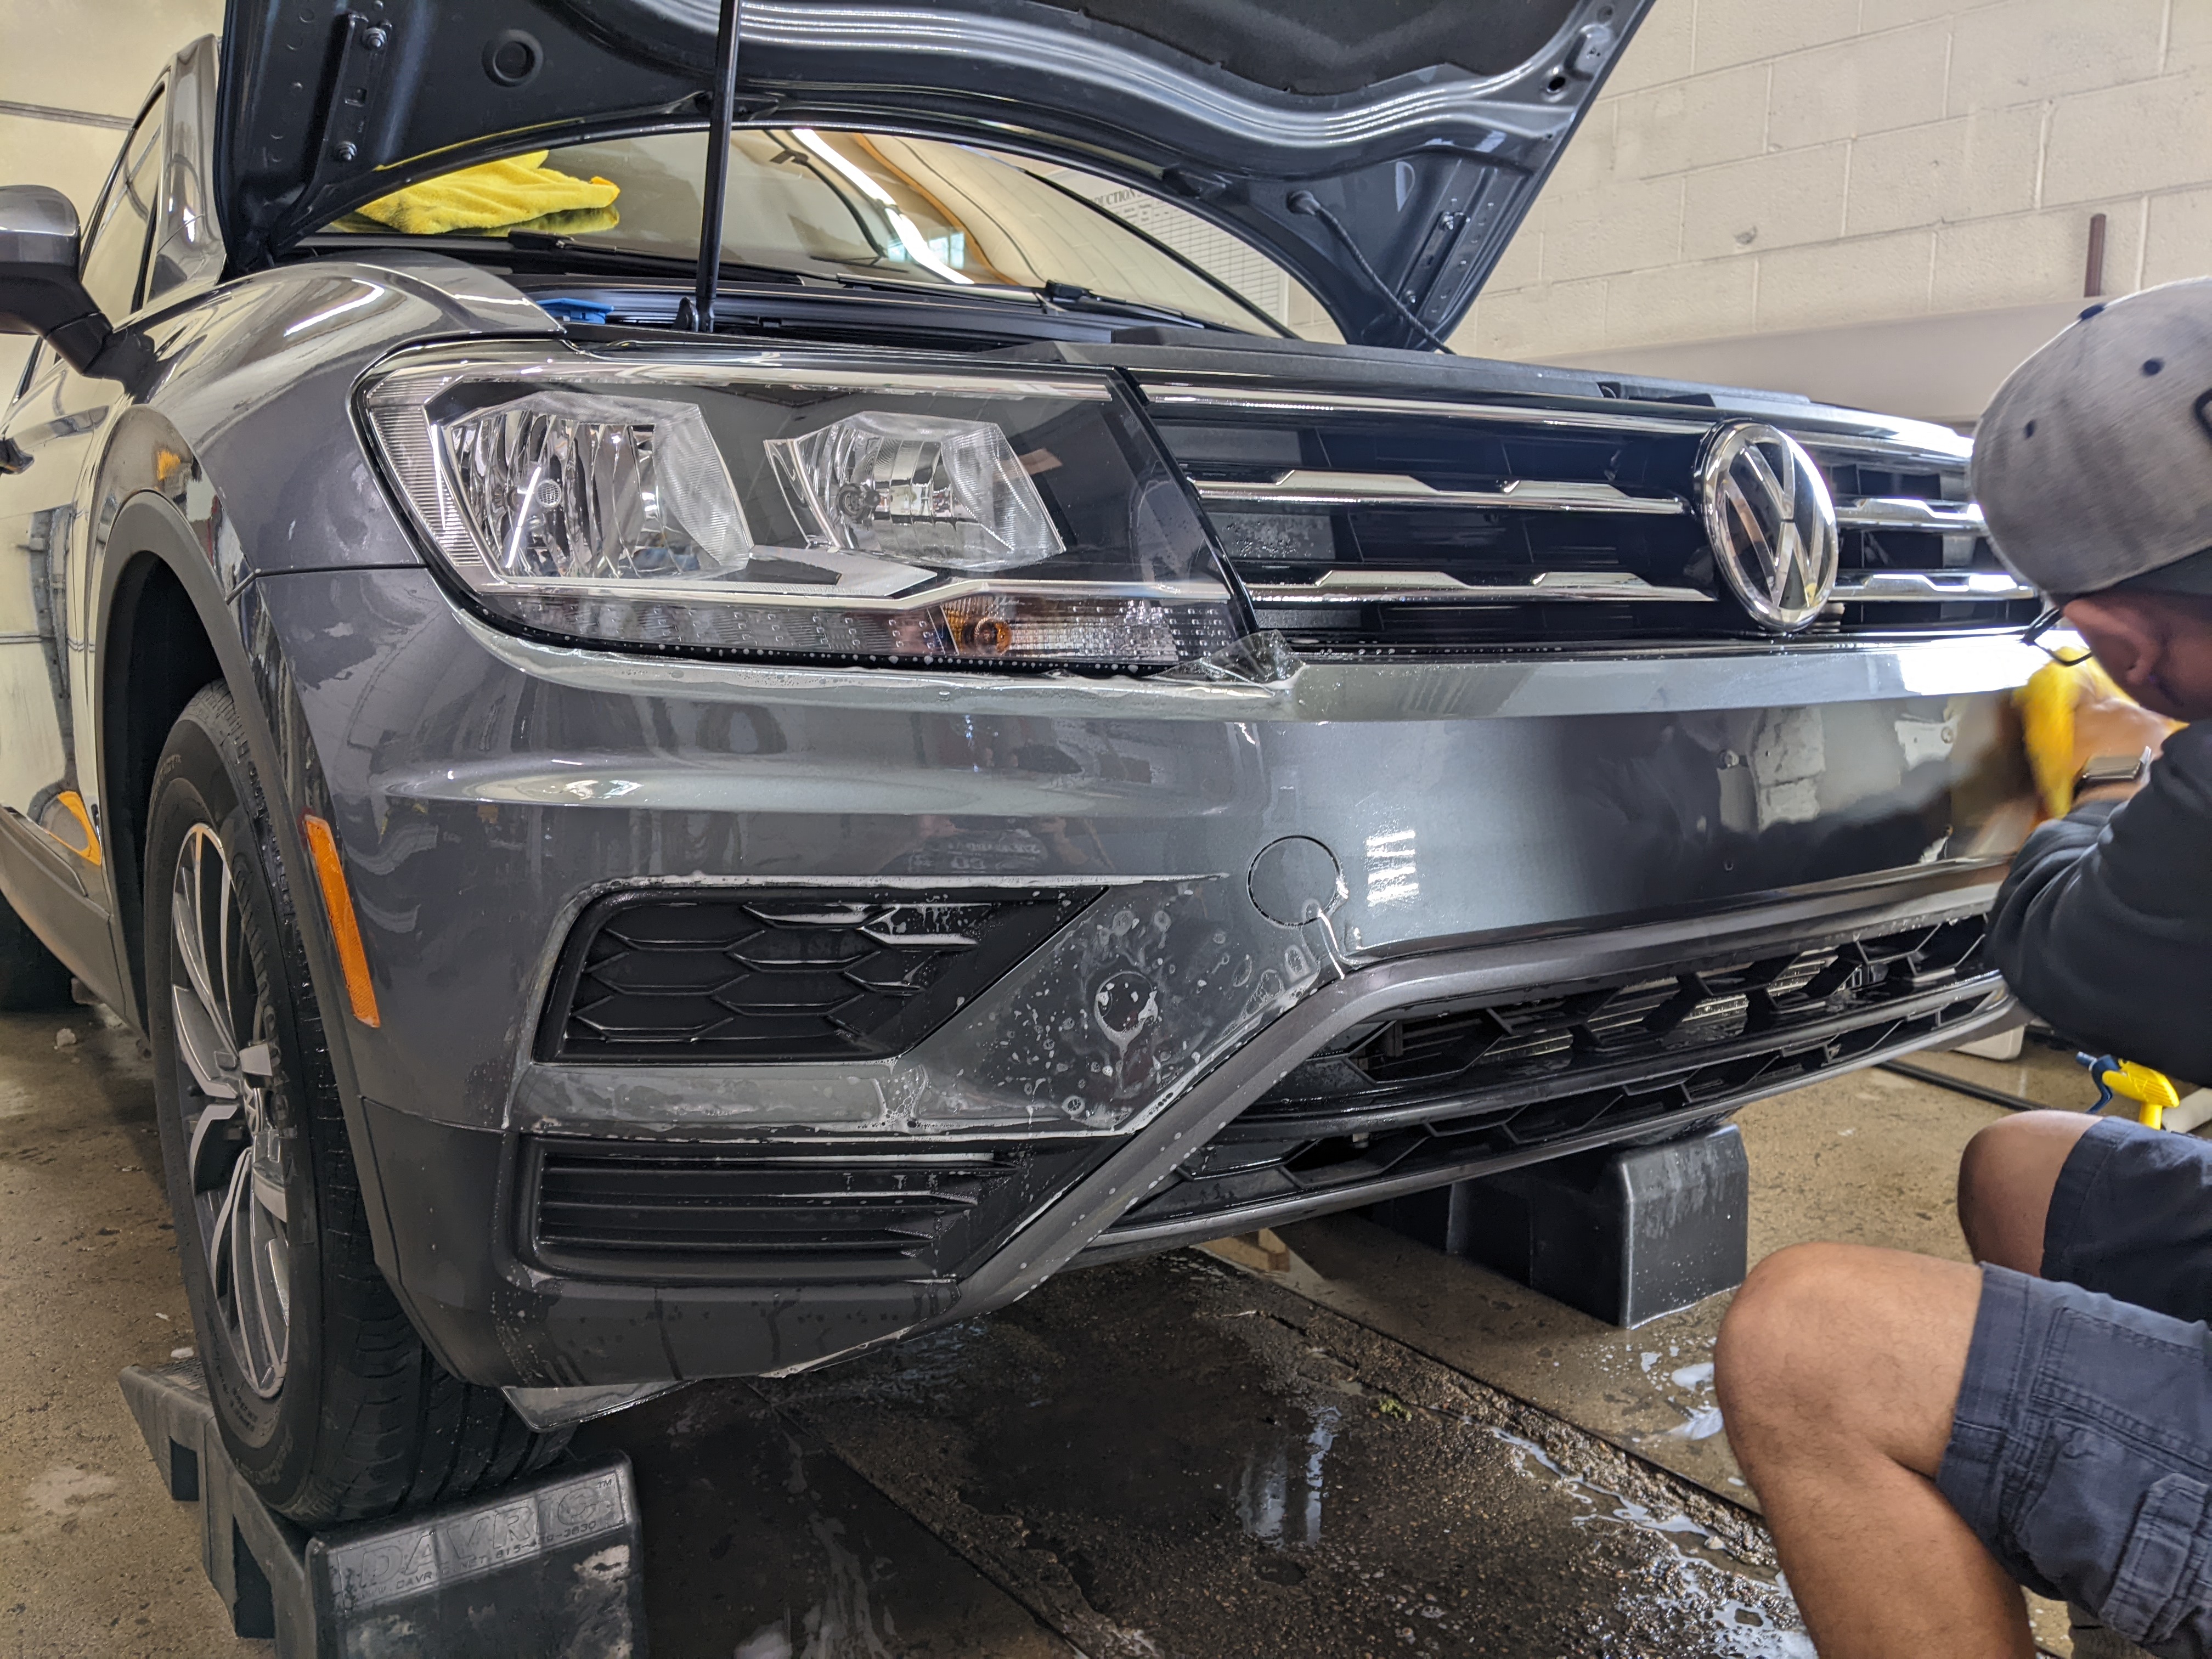 2019 Volkswagen Tiguan. Getting started with the full pre-cut PPF front bumper. 